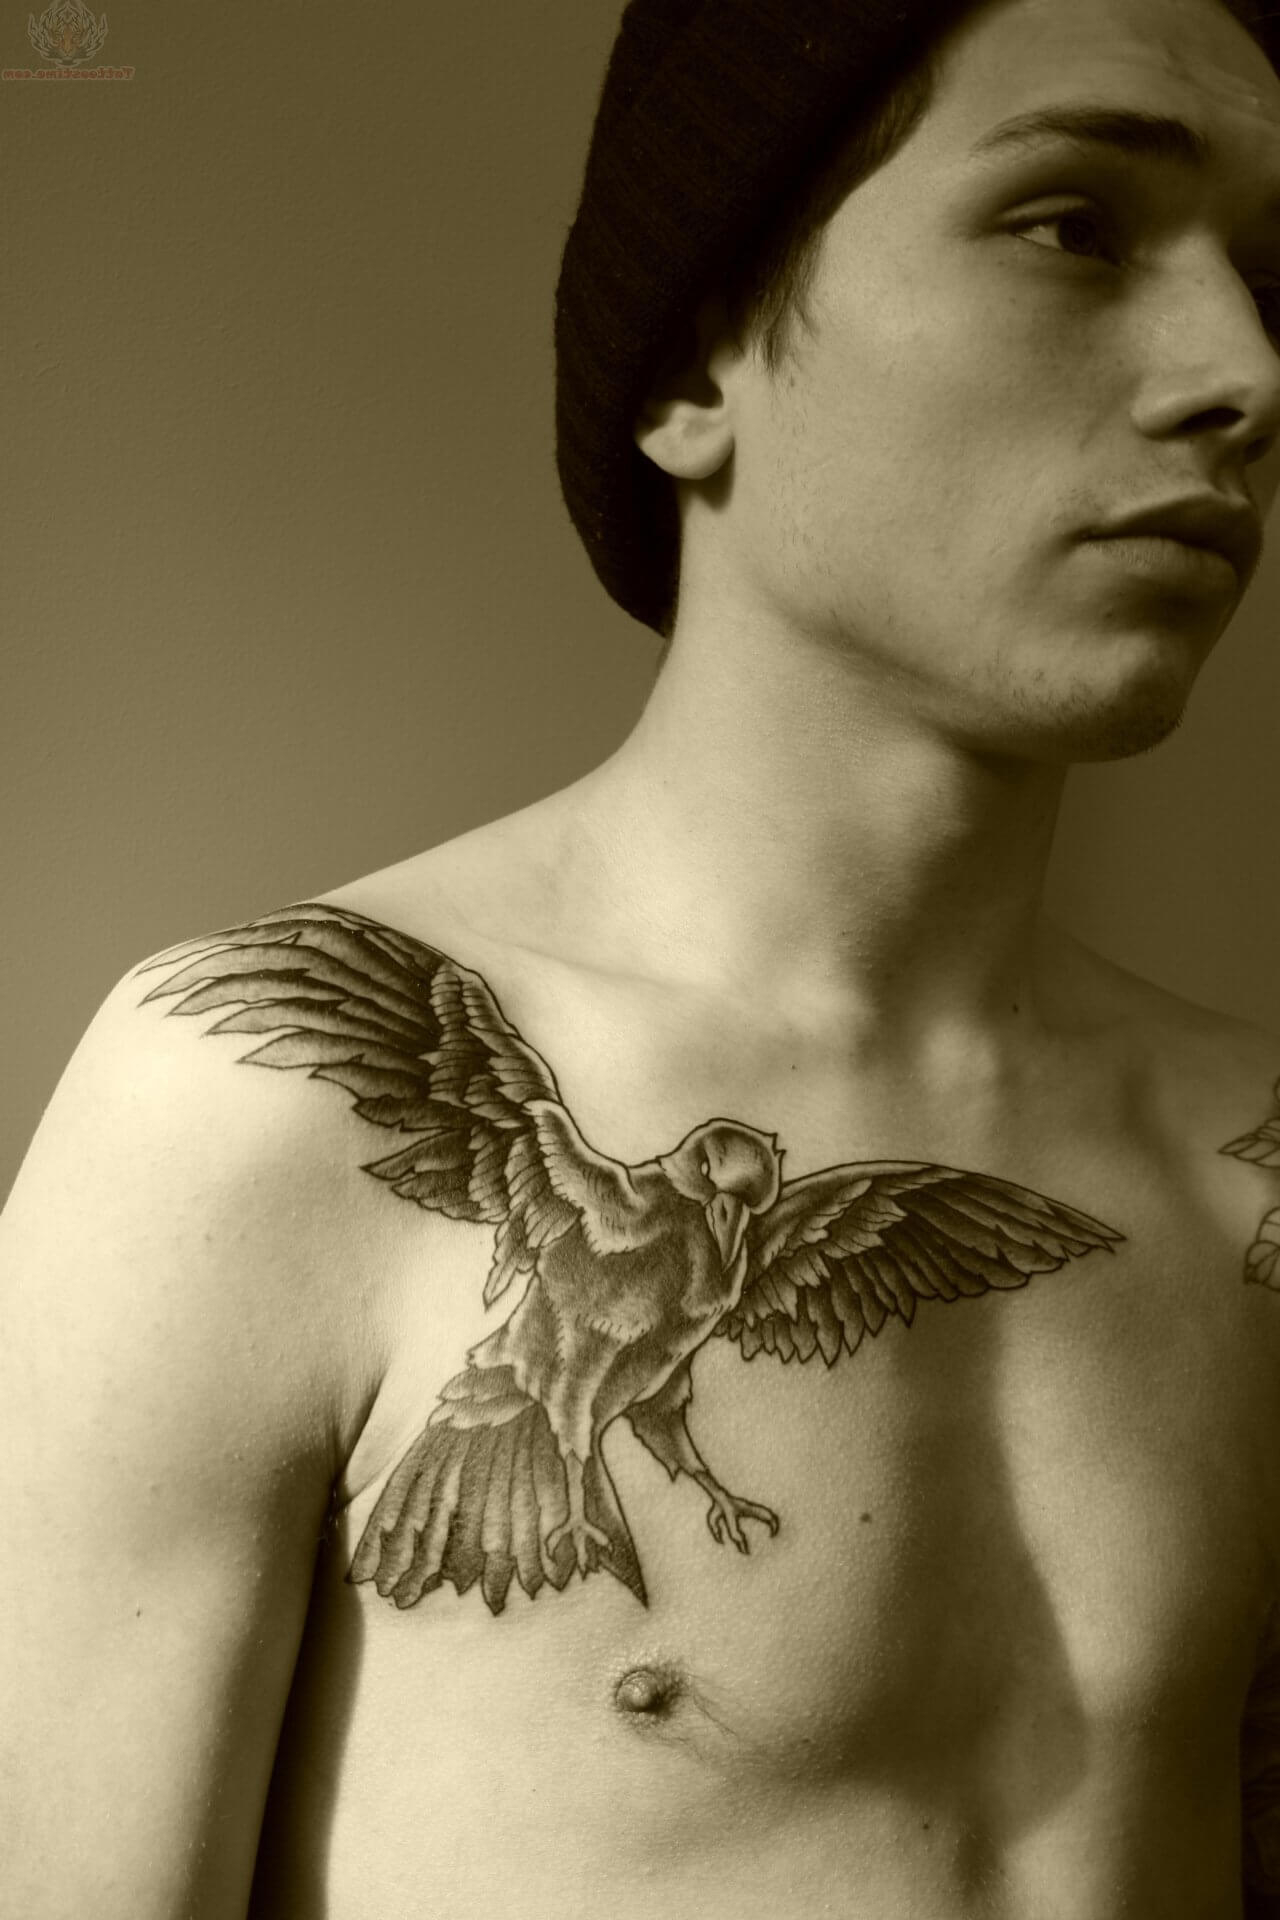 The 100 Best Chest Tattoos For Men Improb within dimensions 1280 X 1920